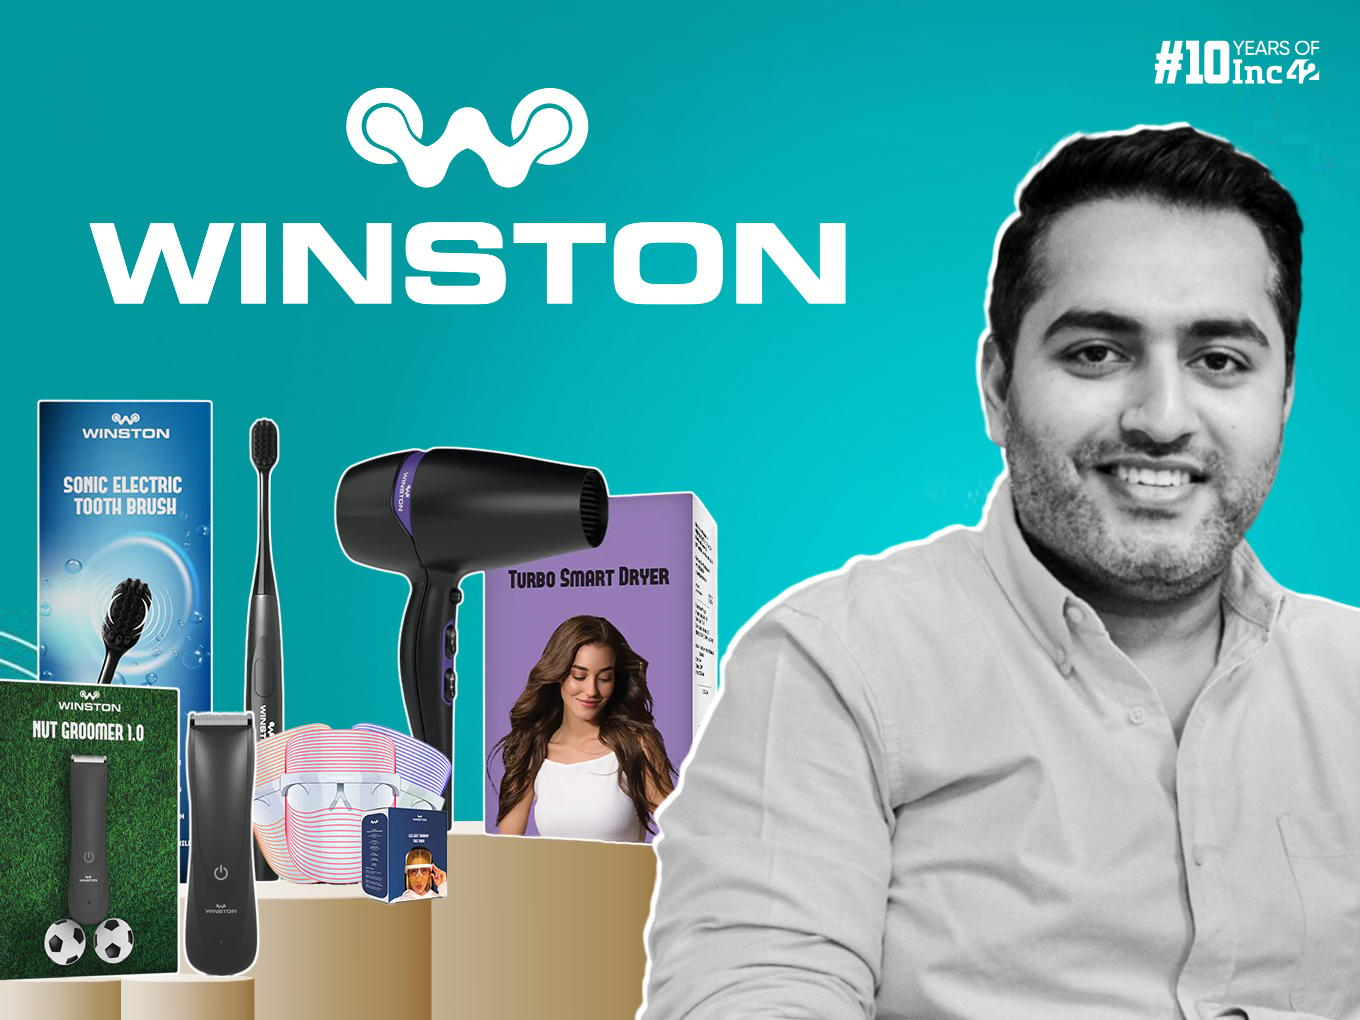 How Shark-Tank-Featured Winston Wants To Become The “Go-To” Grooming Devices Brand In India